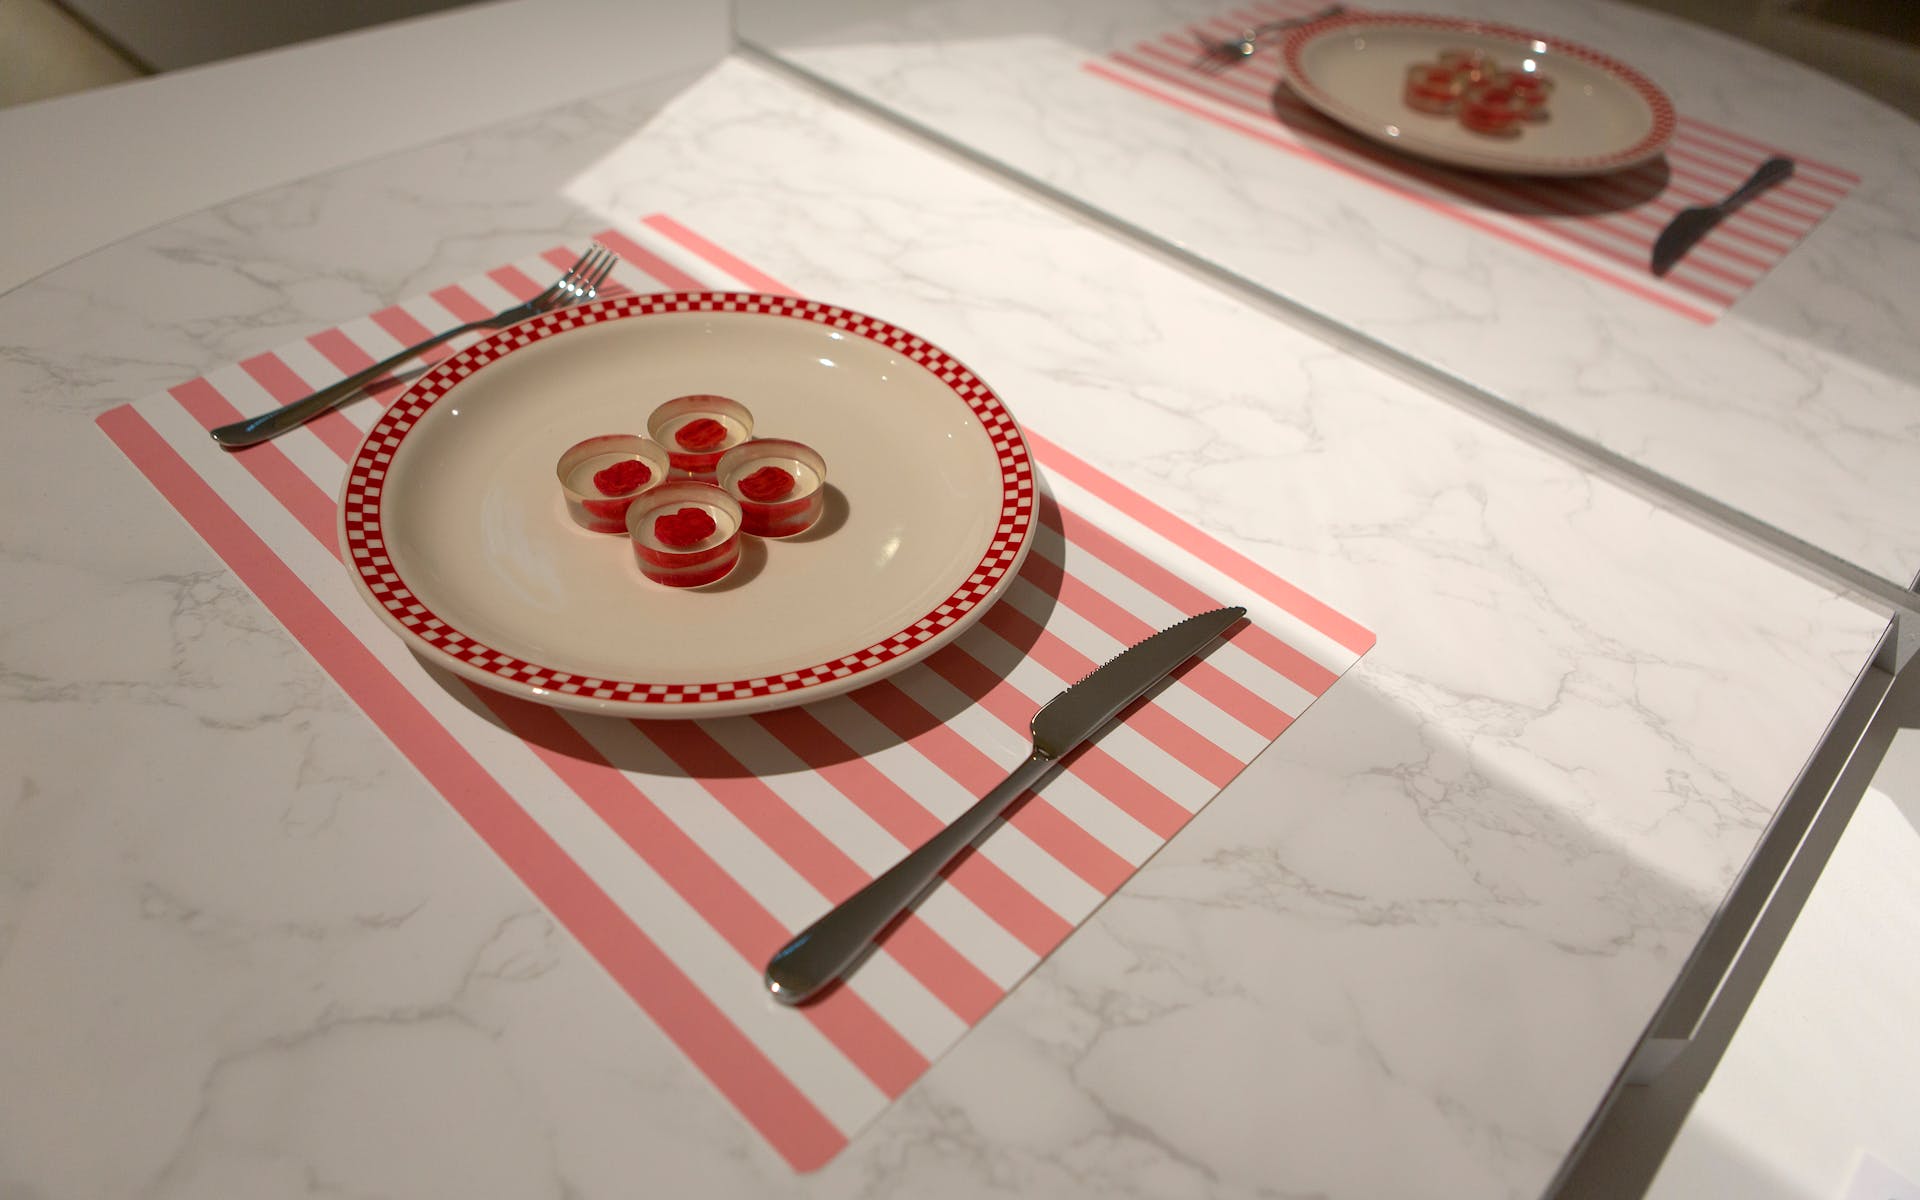 A placemat, knife and fork, and plate with four translucent disks